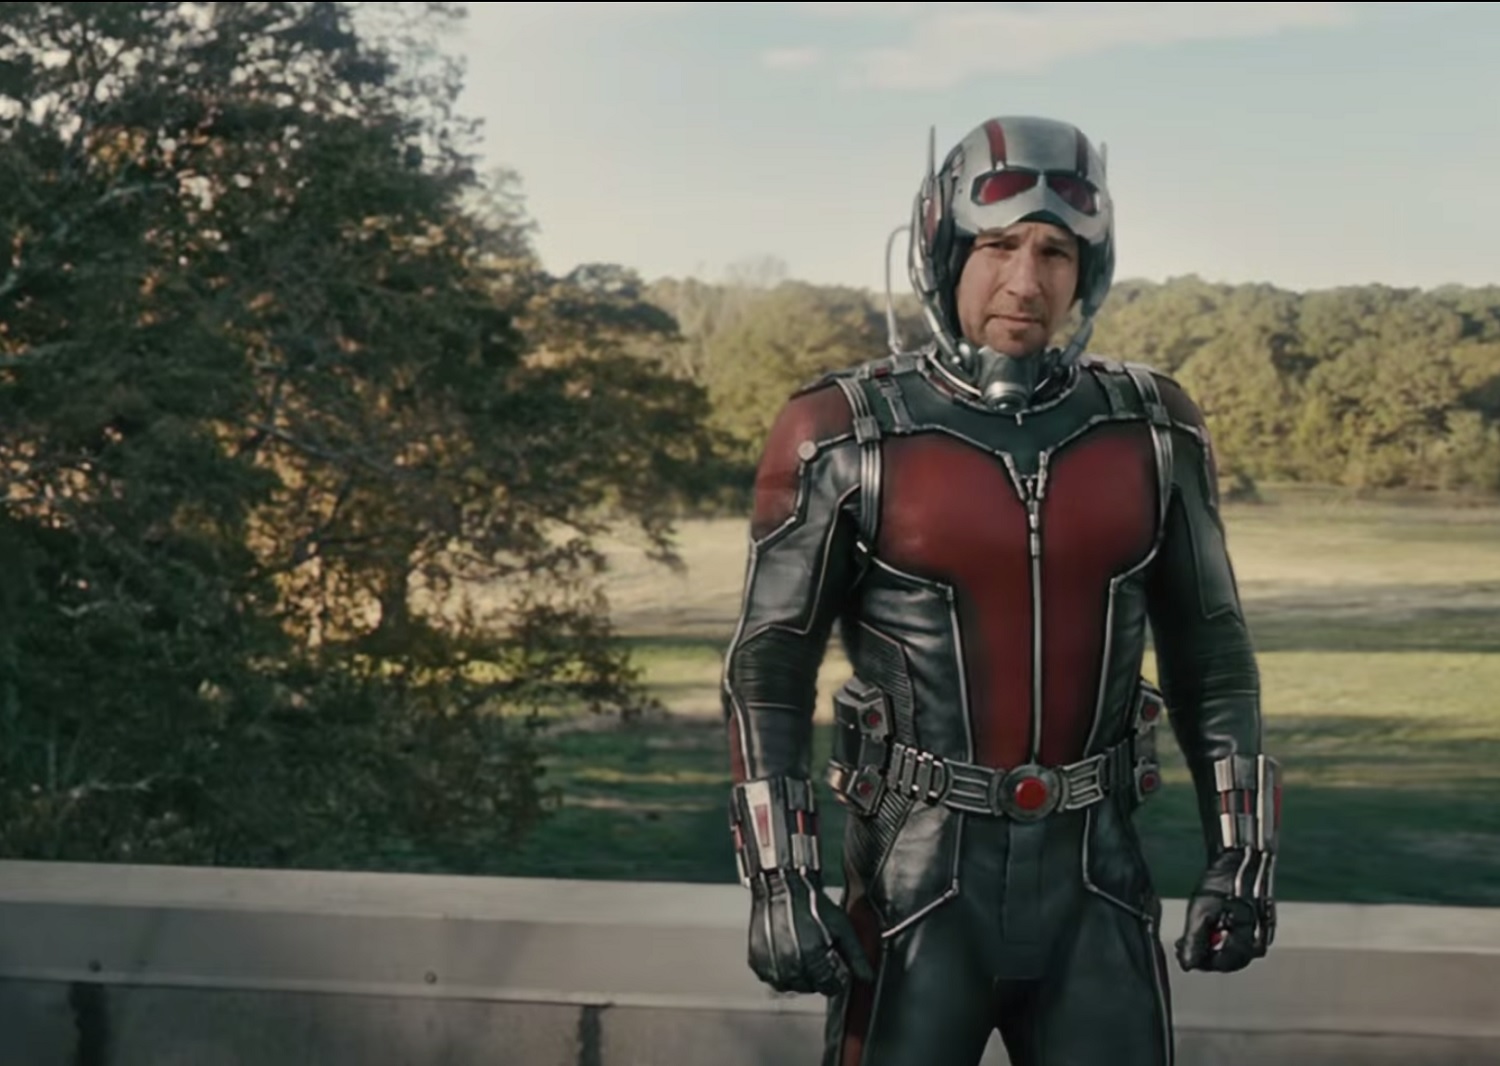 'Ant-Man' Plays With Both Silly And Serious